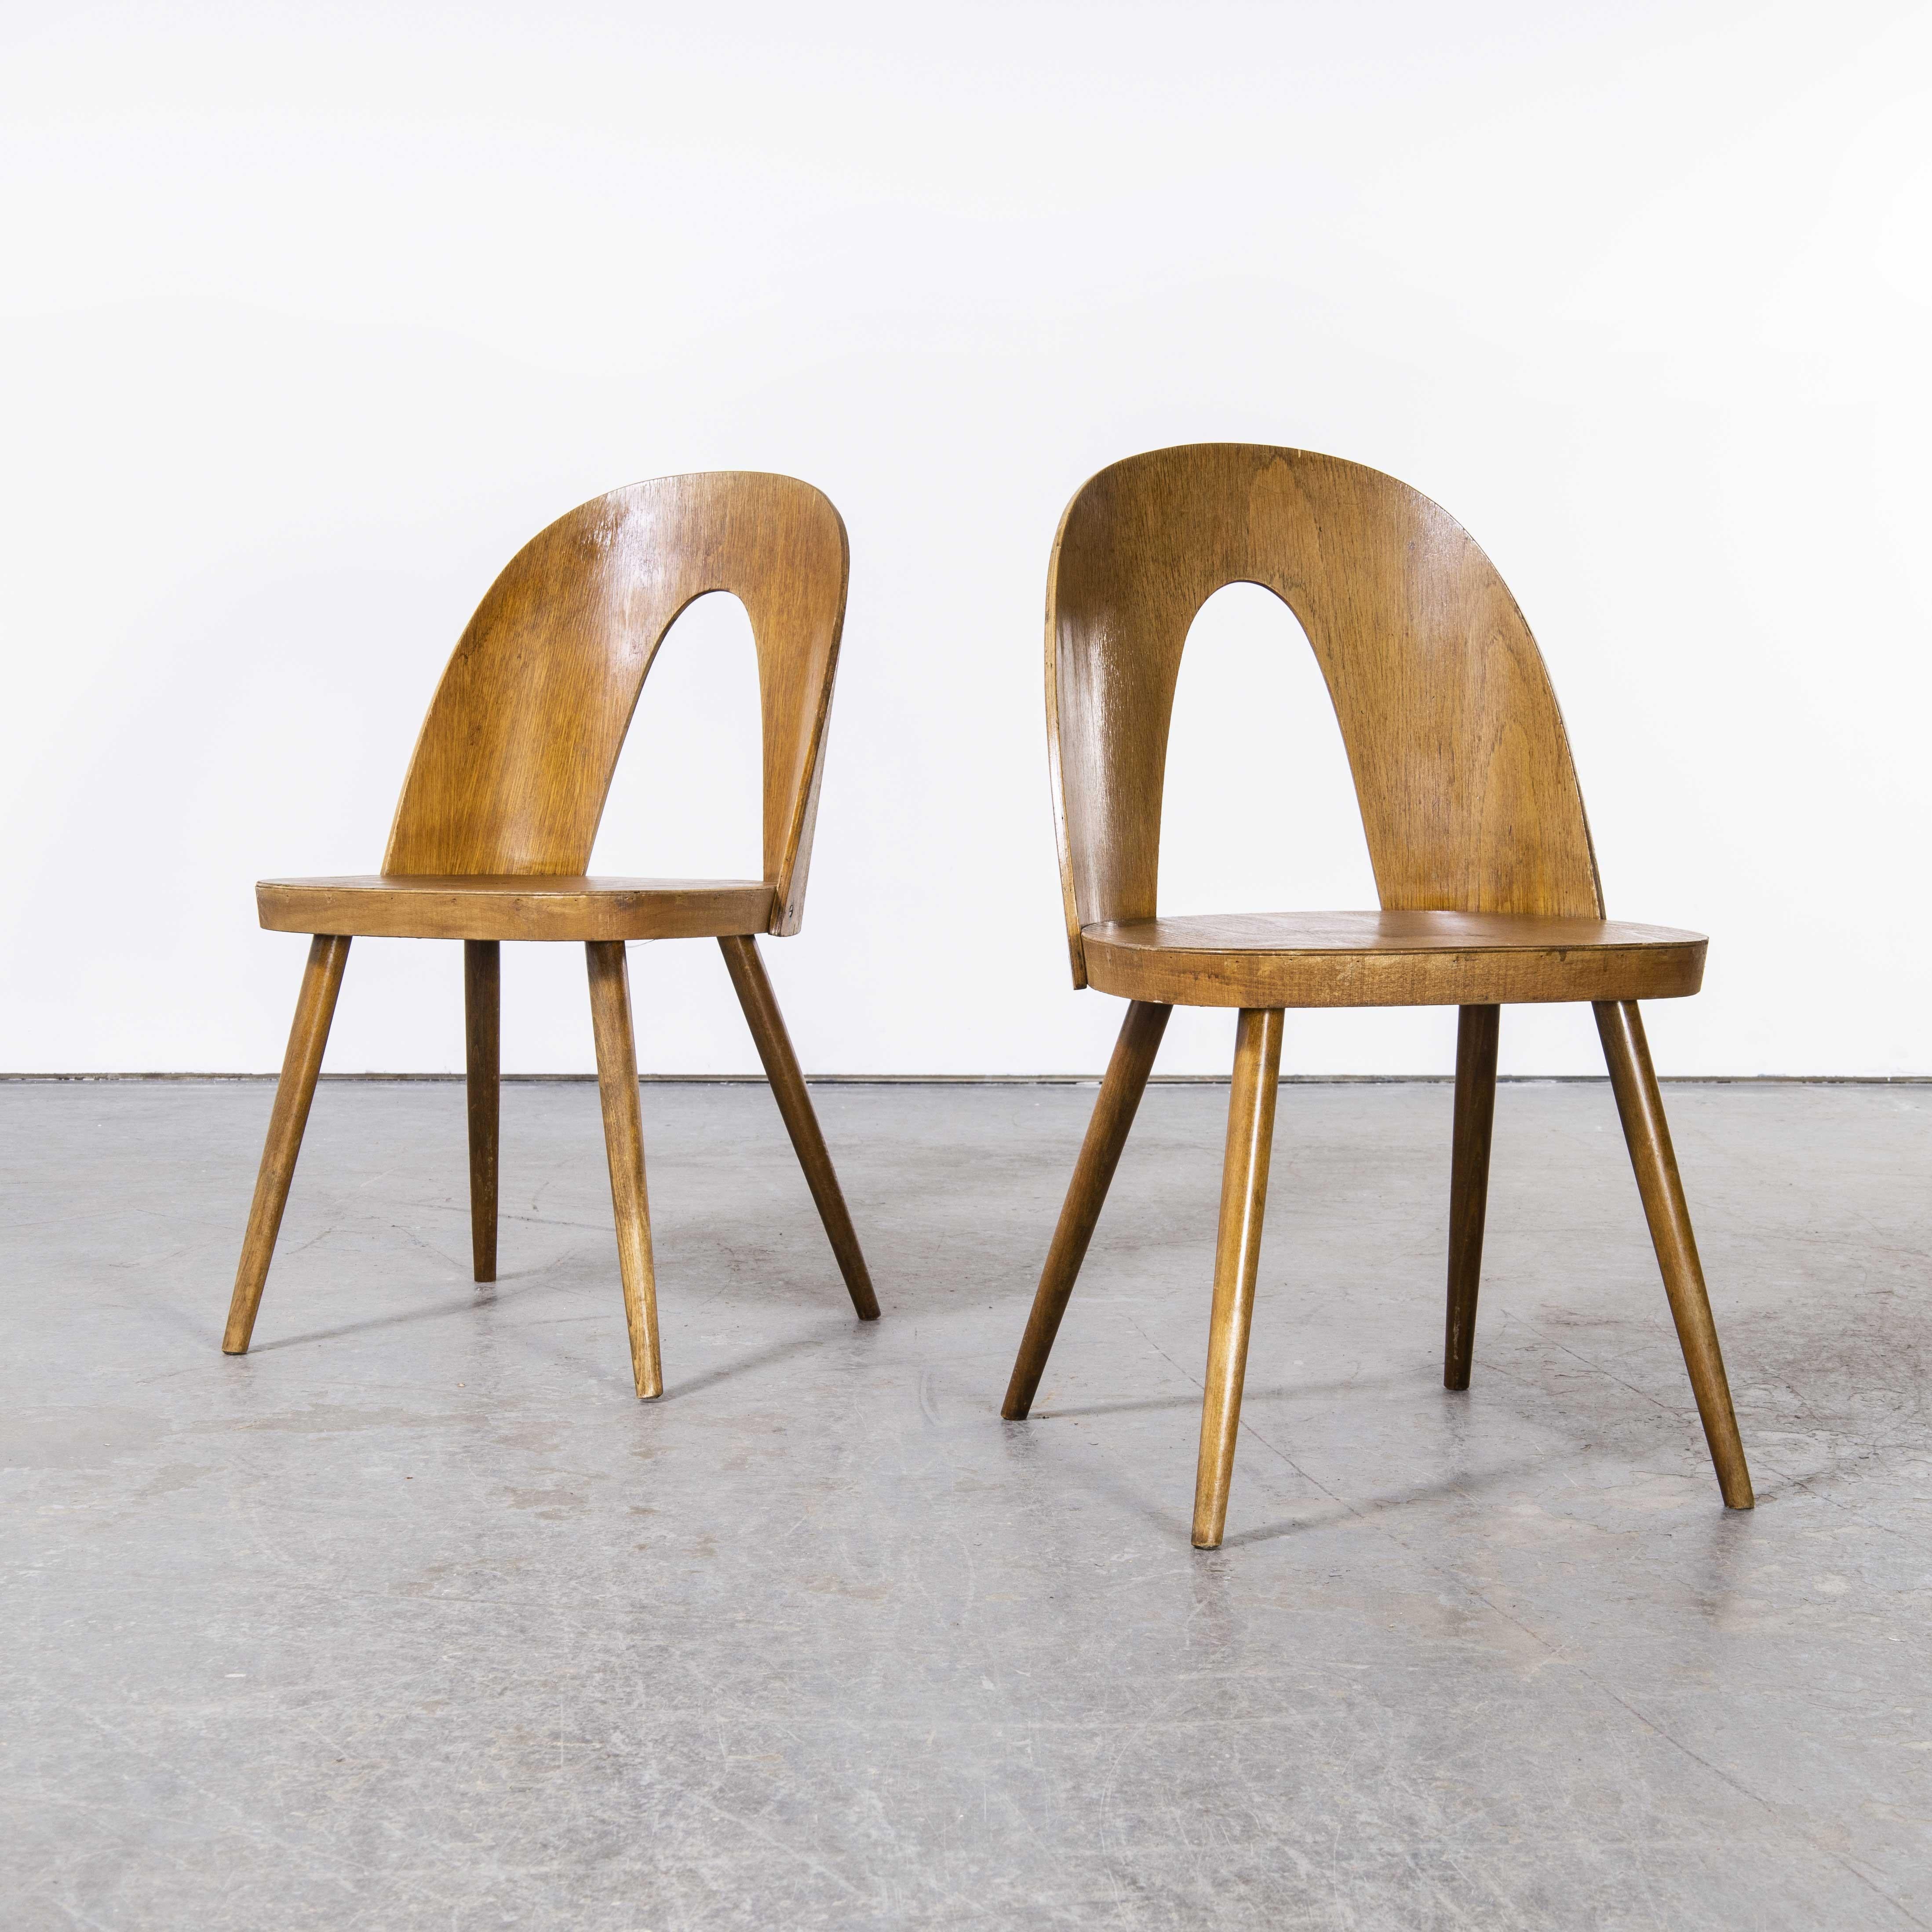 1960s side – dining chairs by Antonin Suman for Ton, pair.
1960s side – dining chairs by Antonin Suman for Ton – pair. Antonin Suman joined Thonet in 1949 and later moved to the Thonet offshoot Ton when the firms split during the post-war political